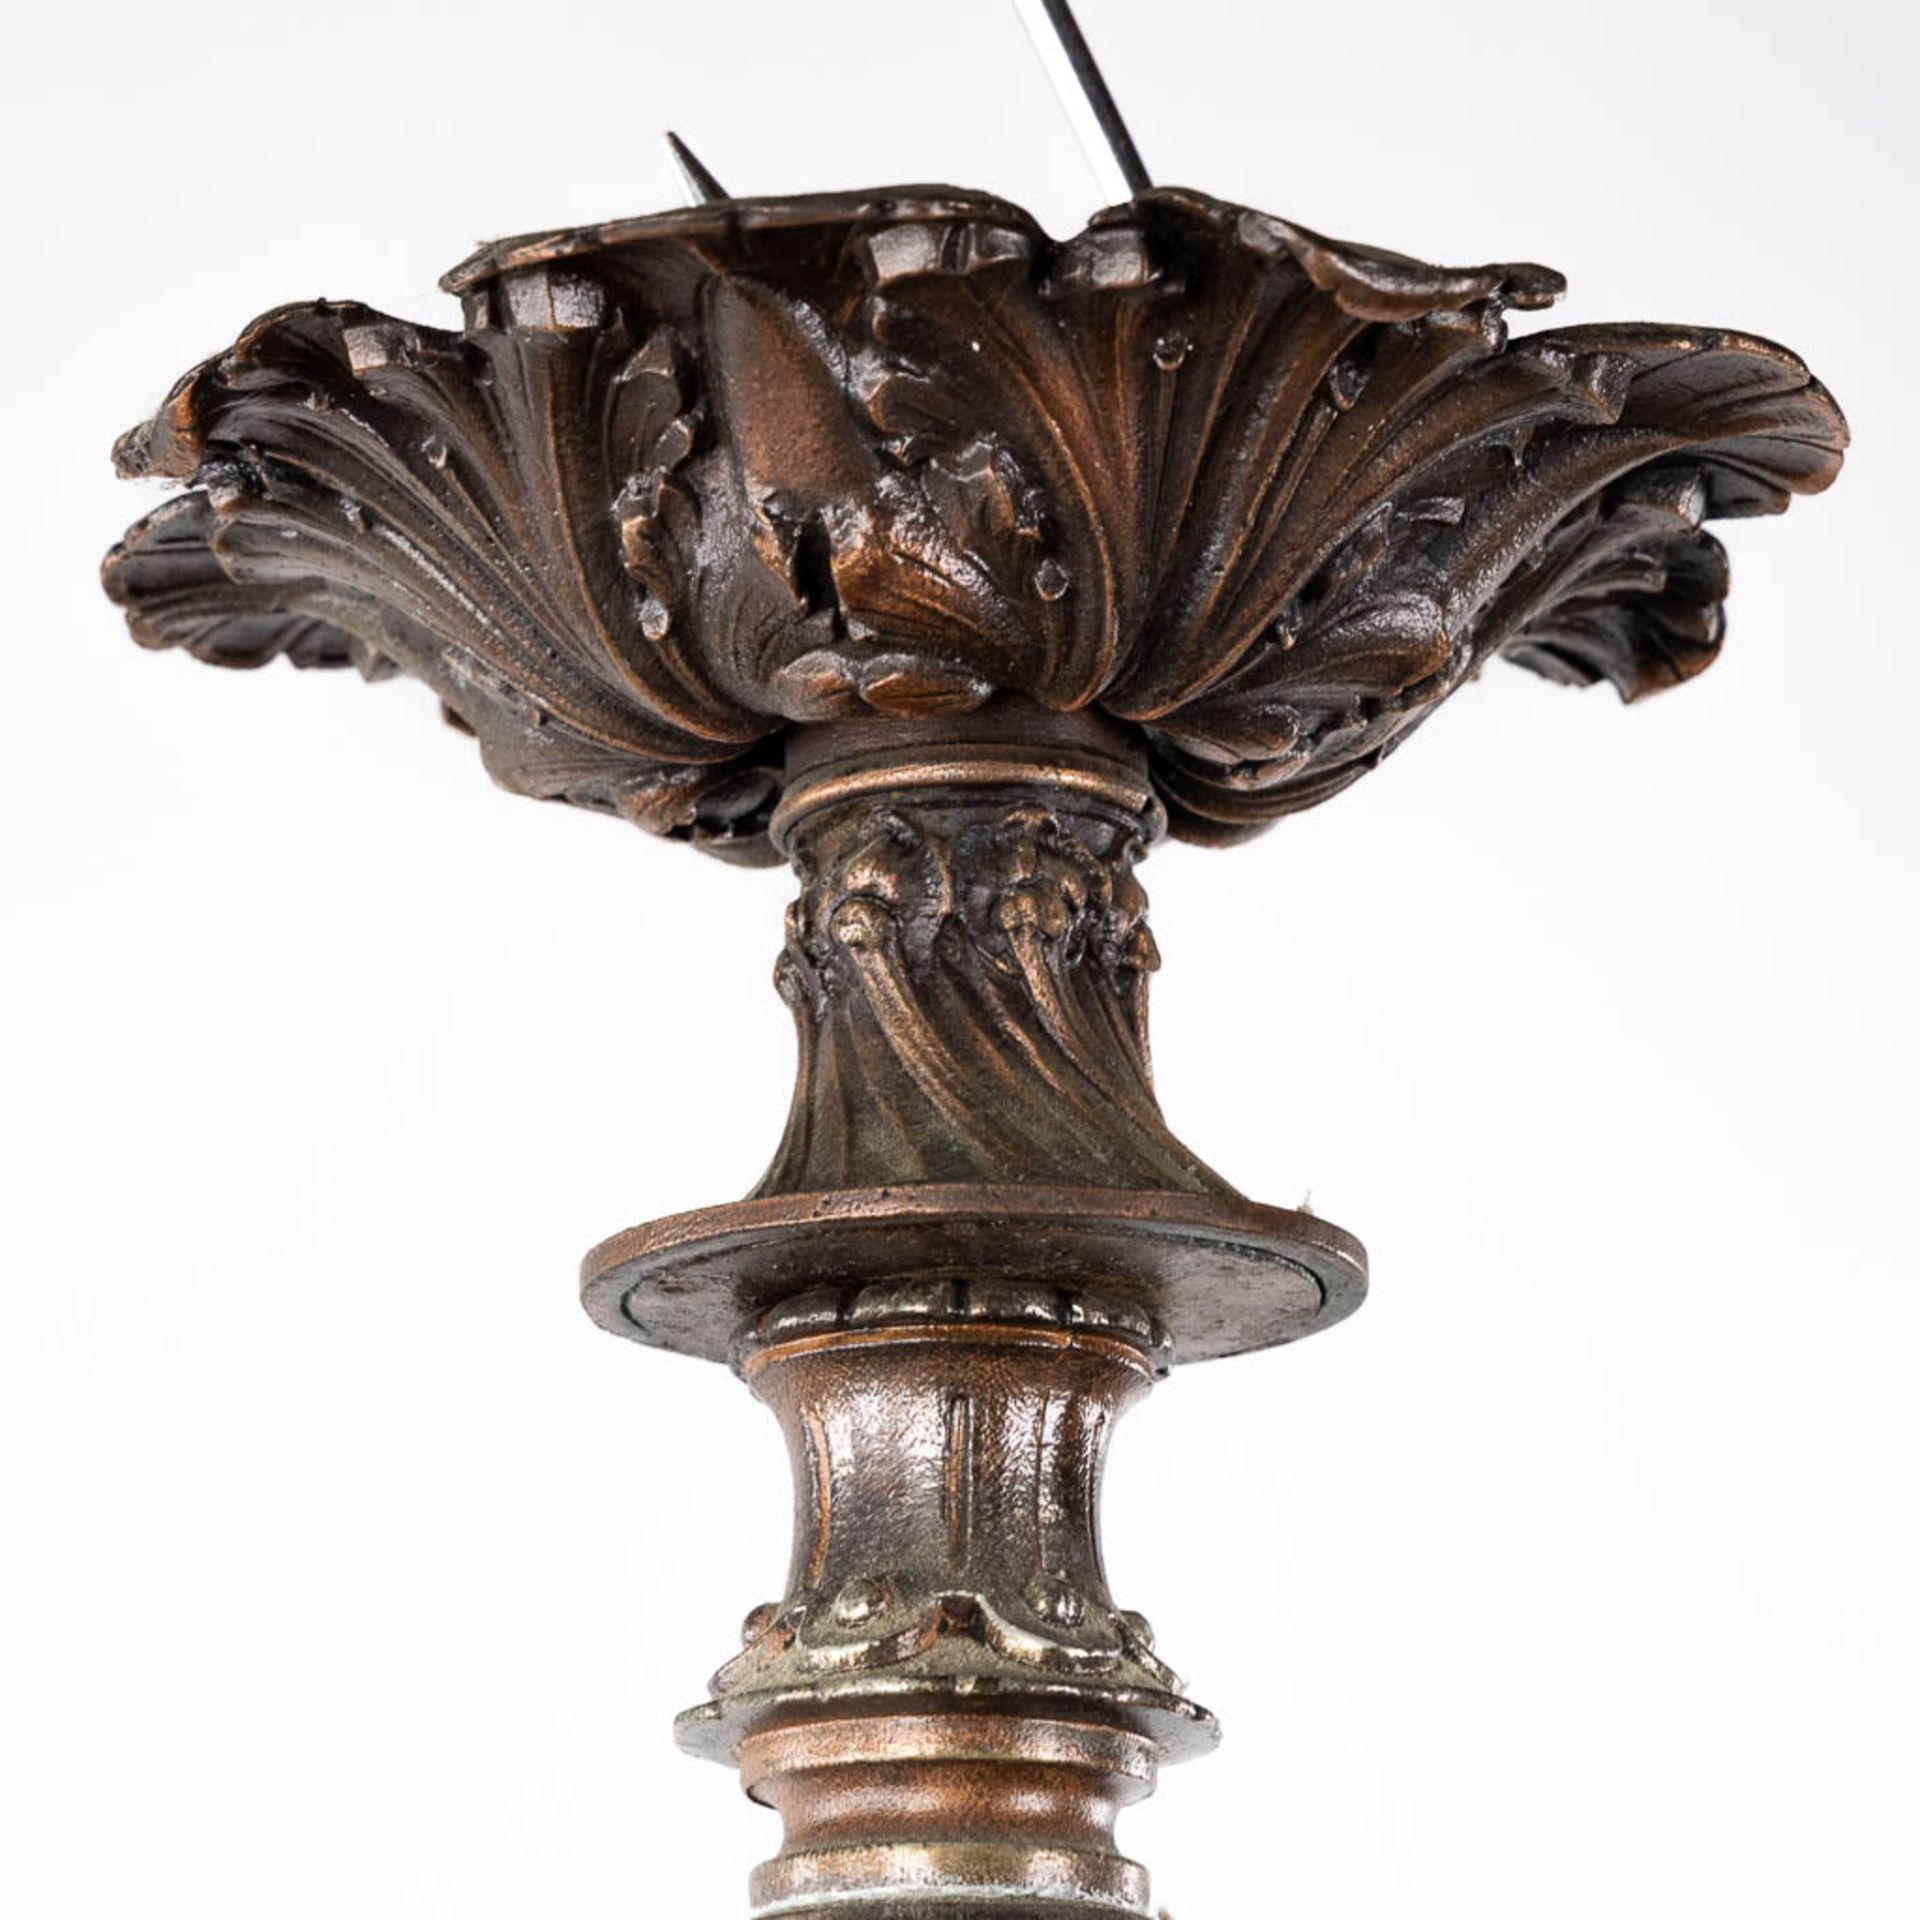 A large lantern, patinated metal and glass. Circa 1900. (H:144 x D:45 cm) - Image 3 of 12